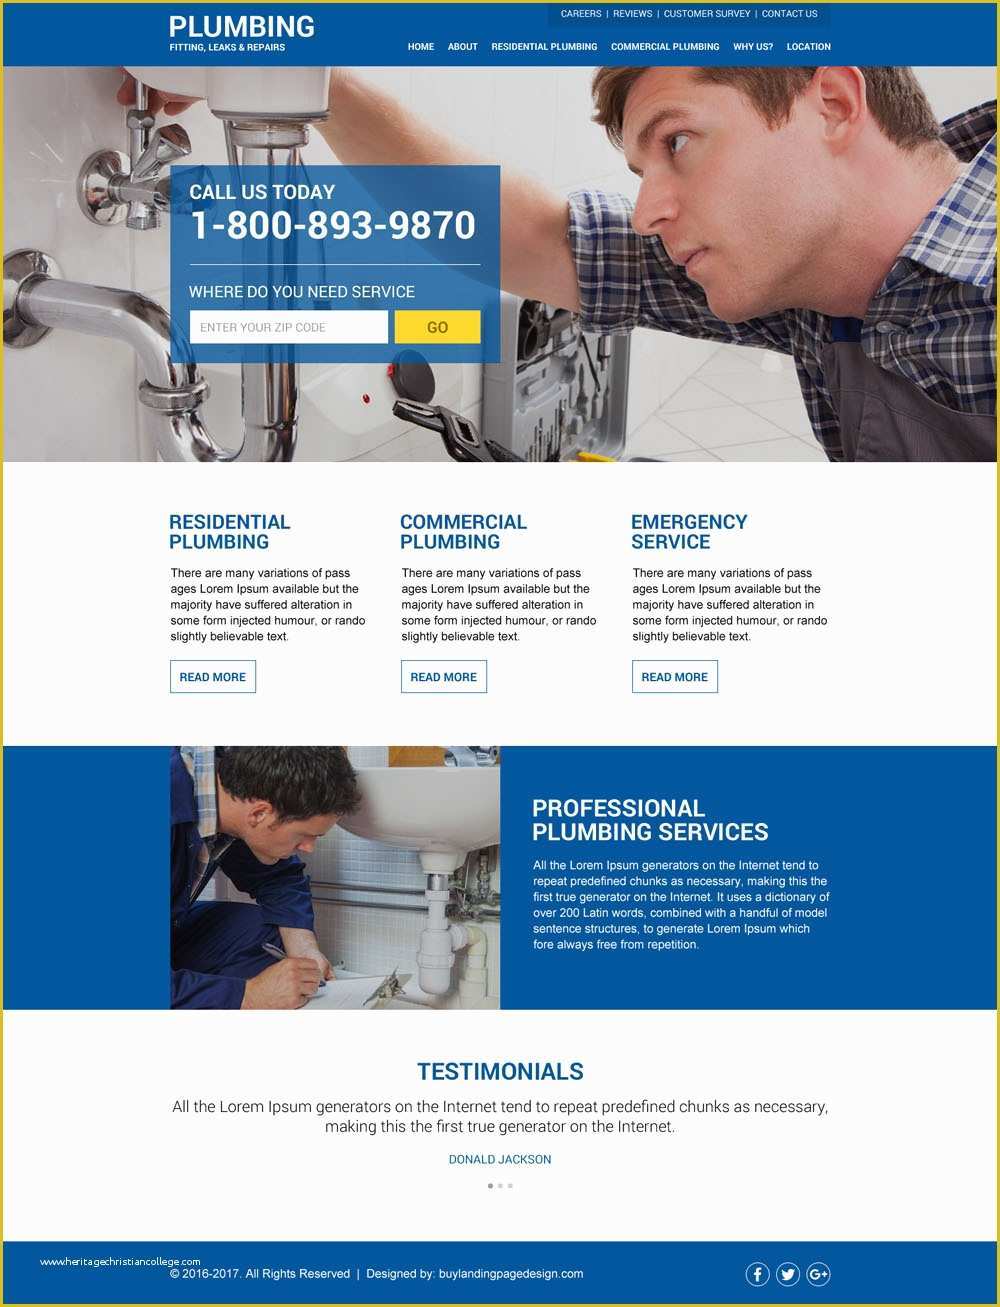 Free Plumbing Templates Of Pluming Services Free Quote Lead Capturing Landing Page Design